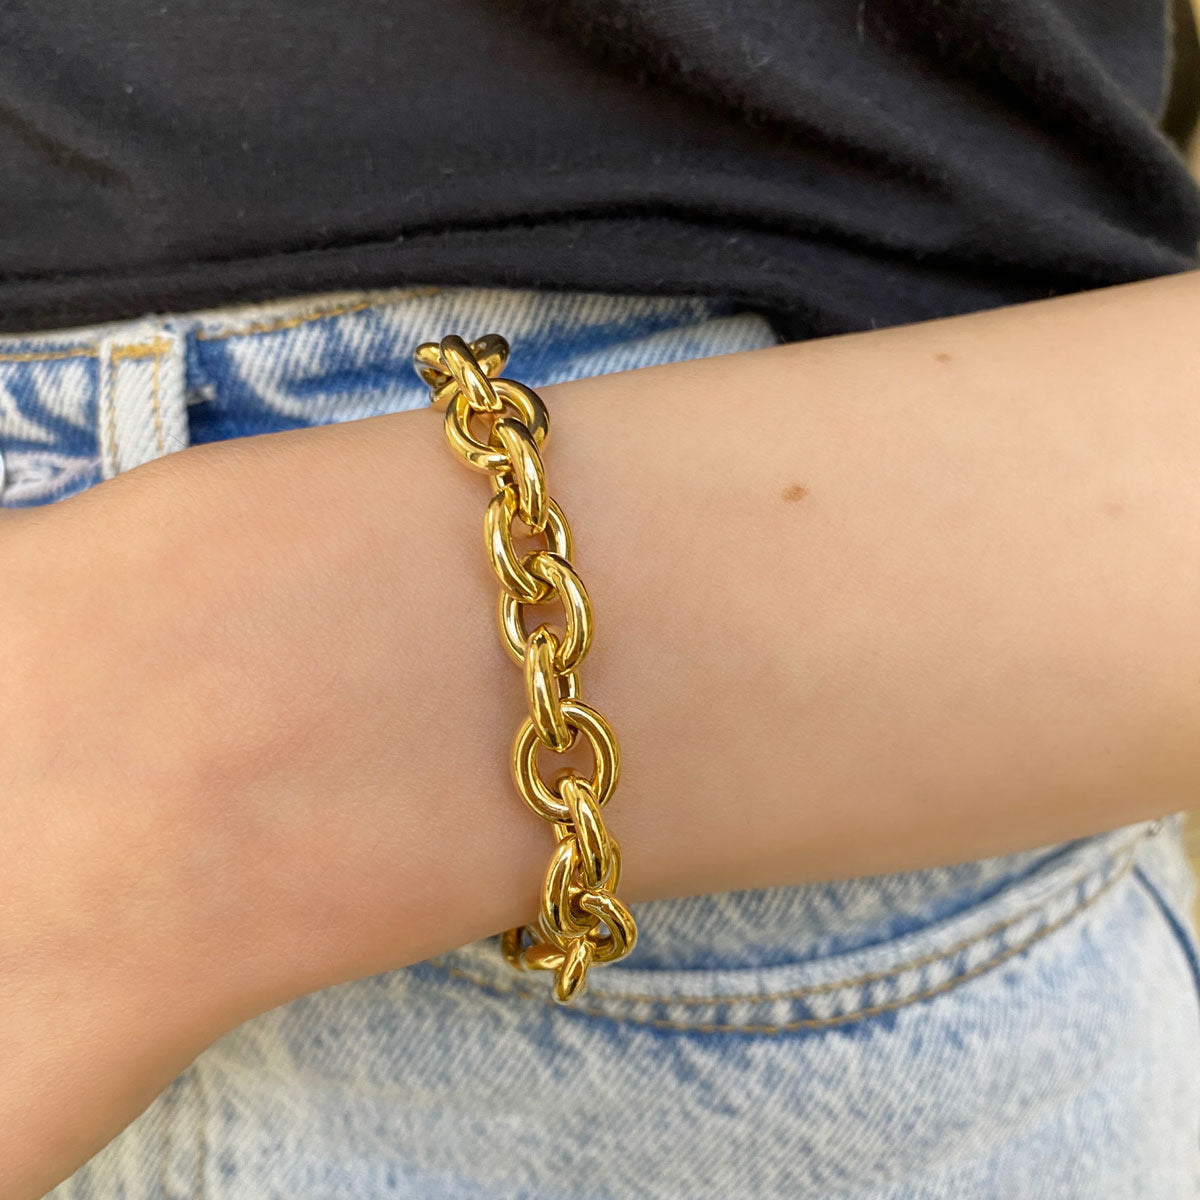 Gold Bracelet With Black Beads and O Pattern for Kids